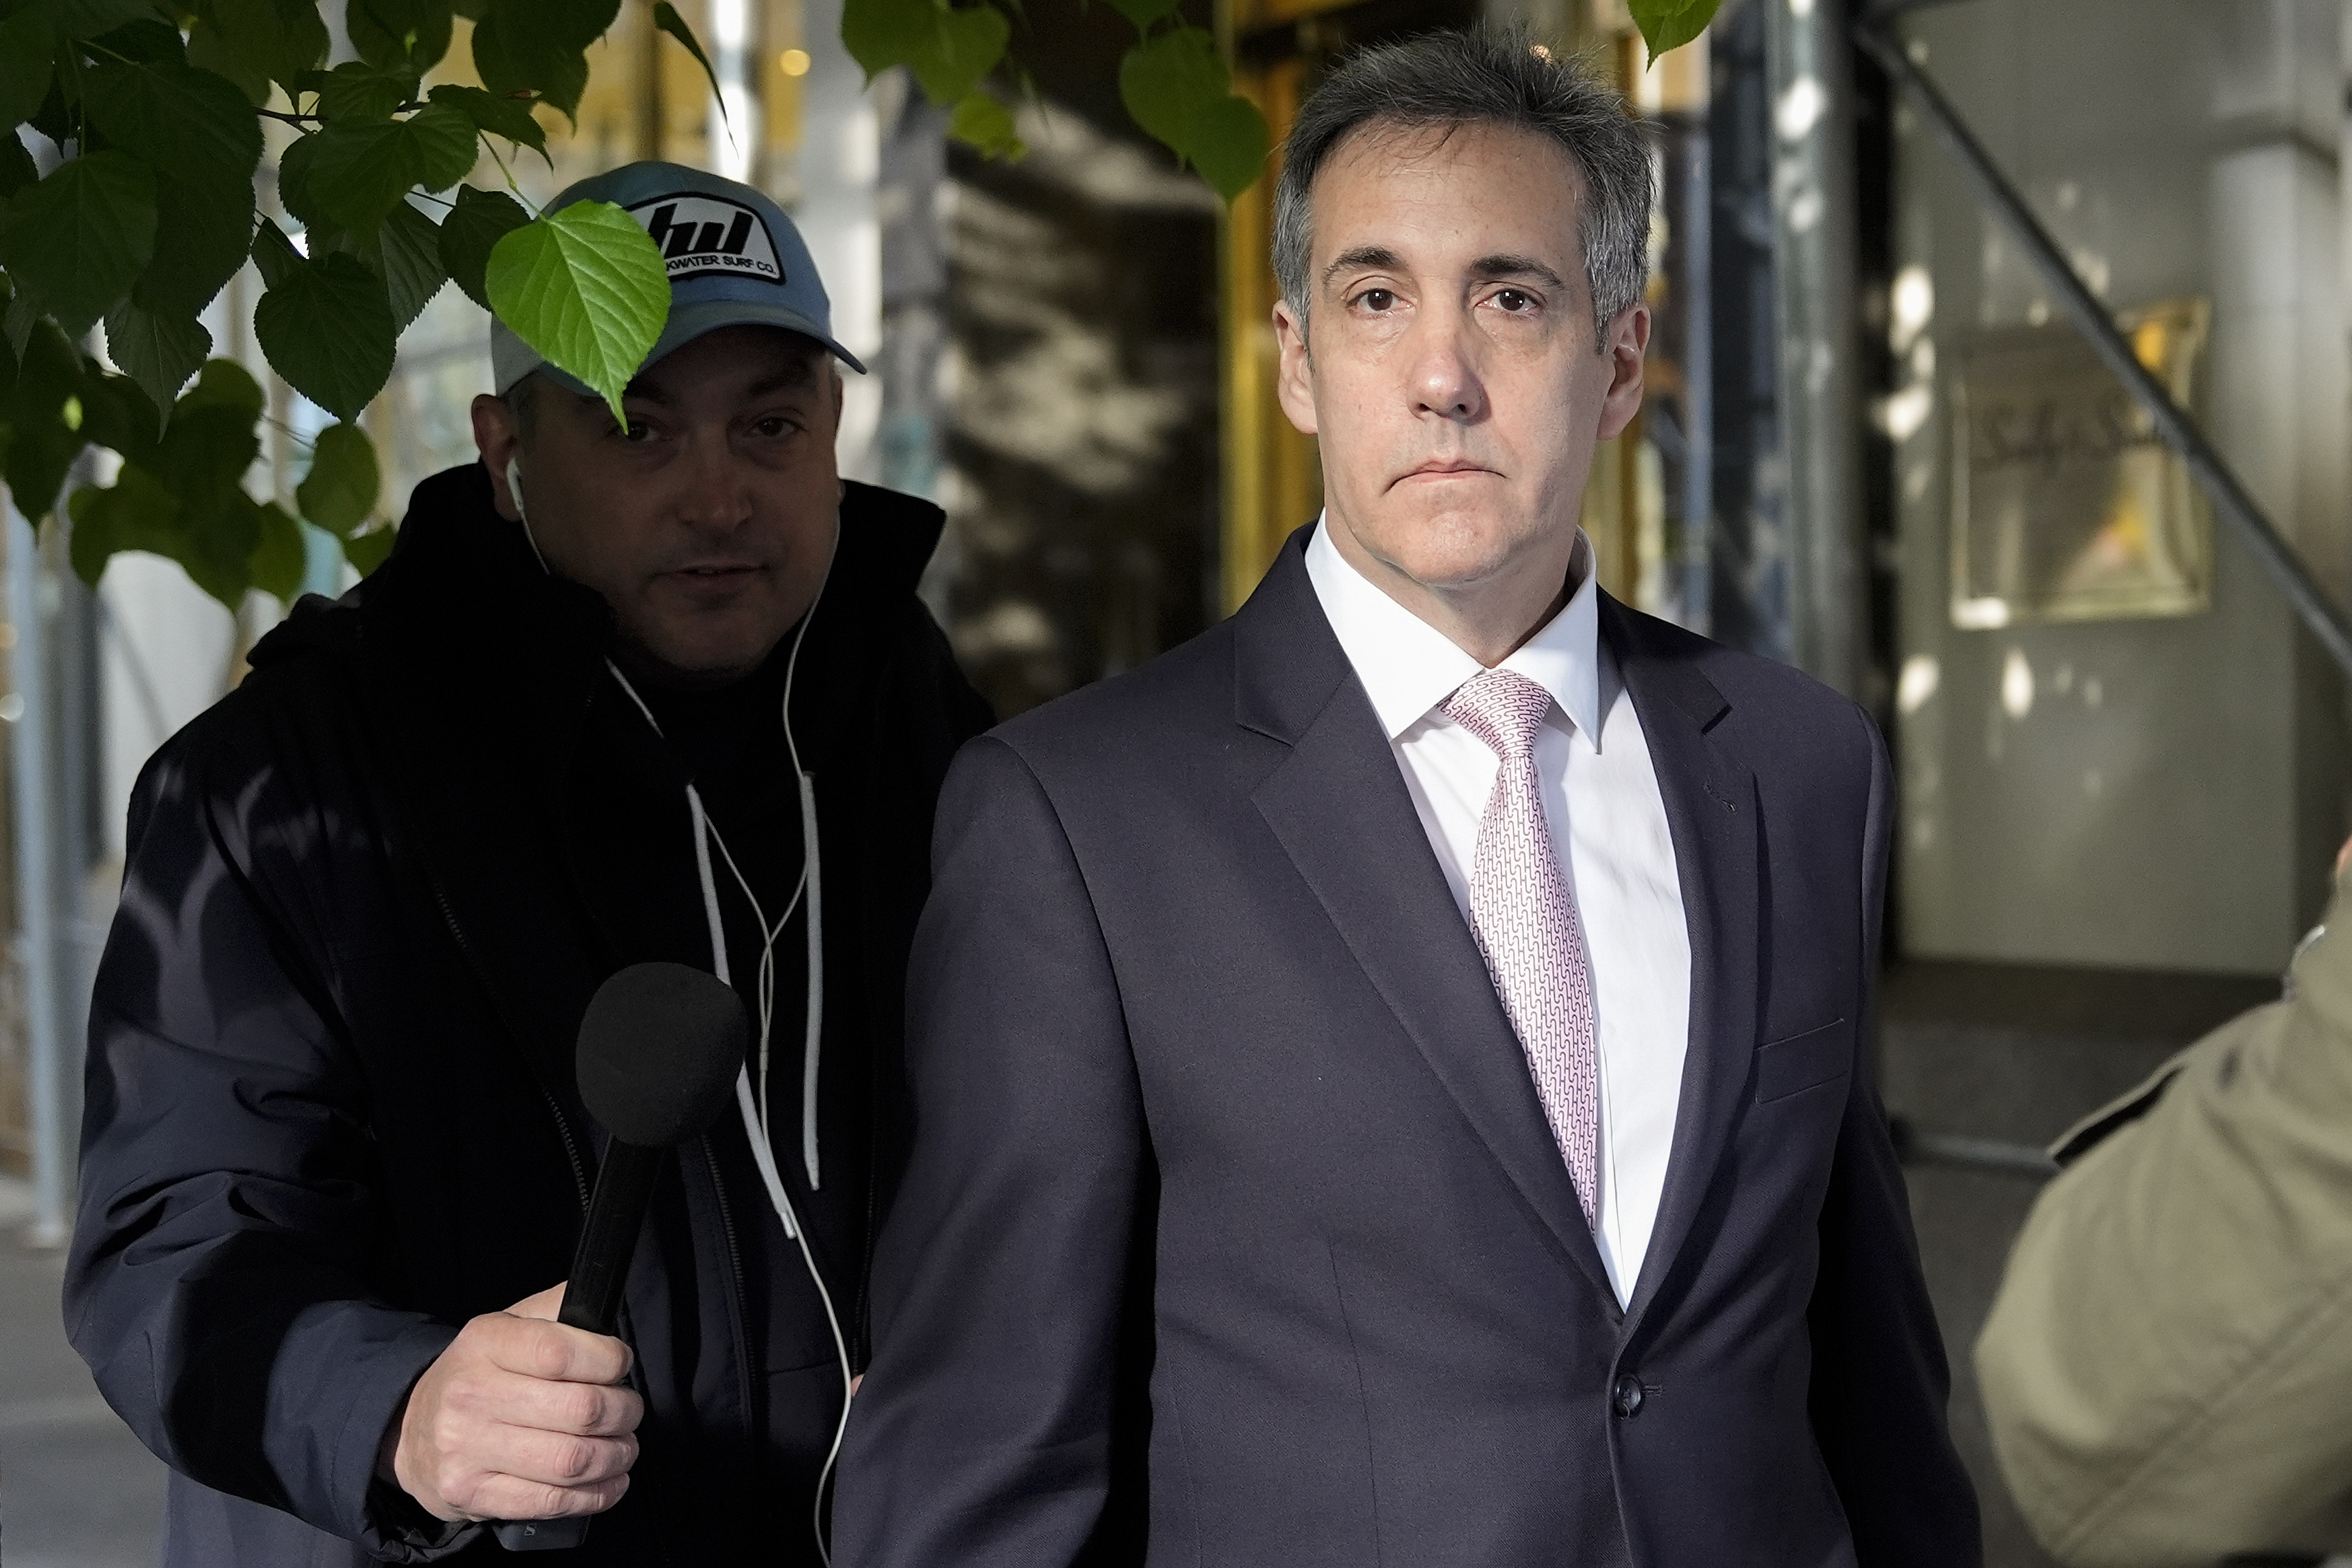 Michael Cohen, right, on his way to Manhattan criminal court in New York on Monday. Photo: AP